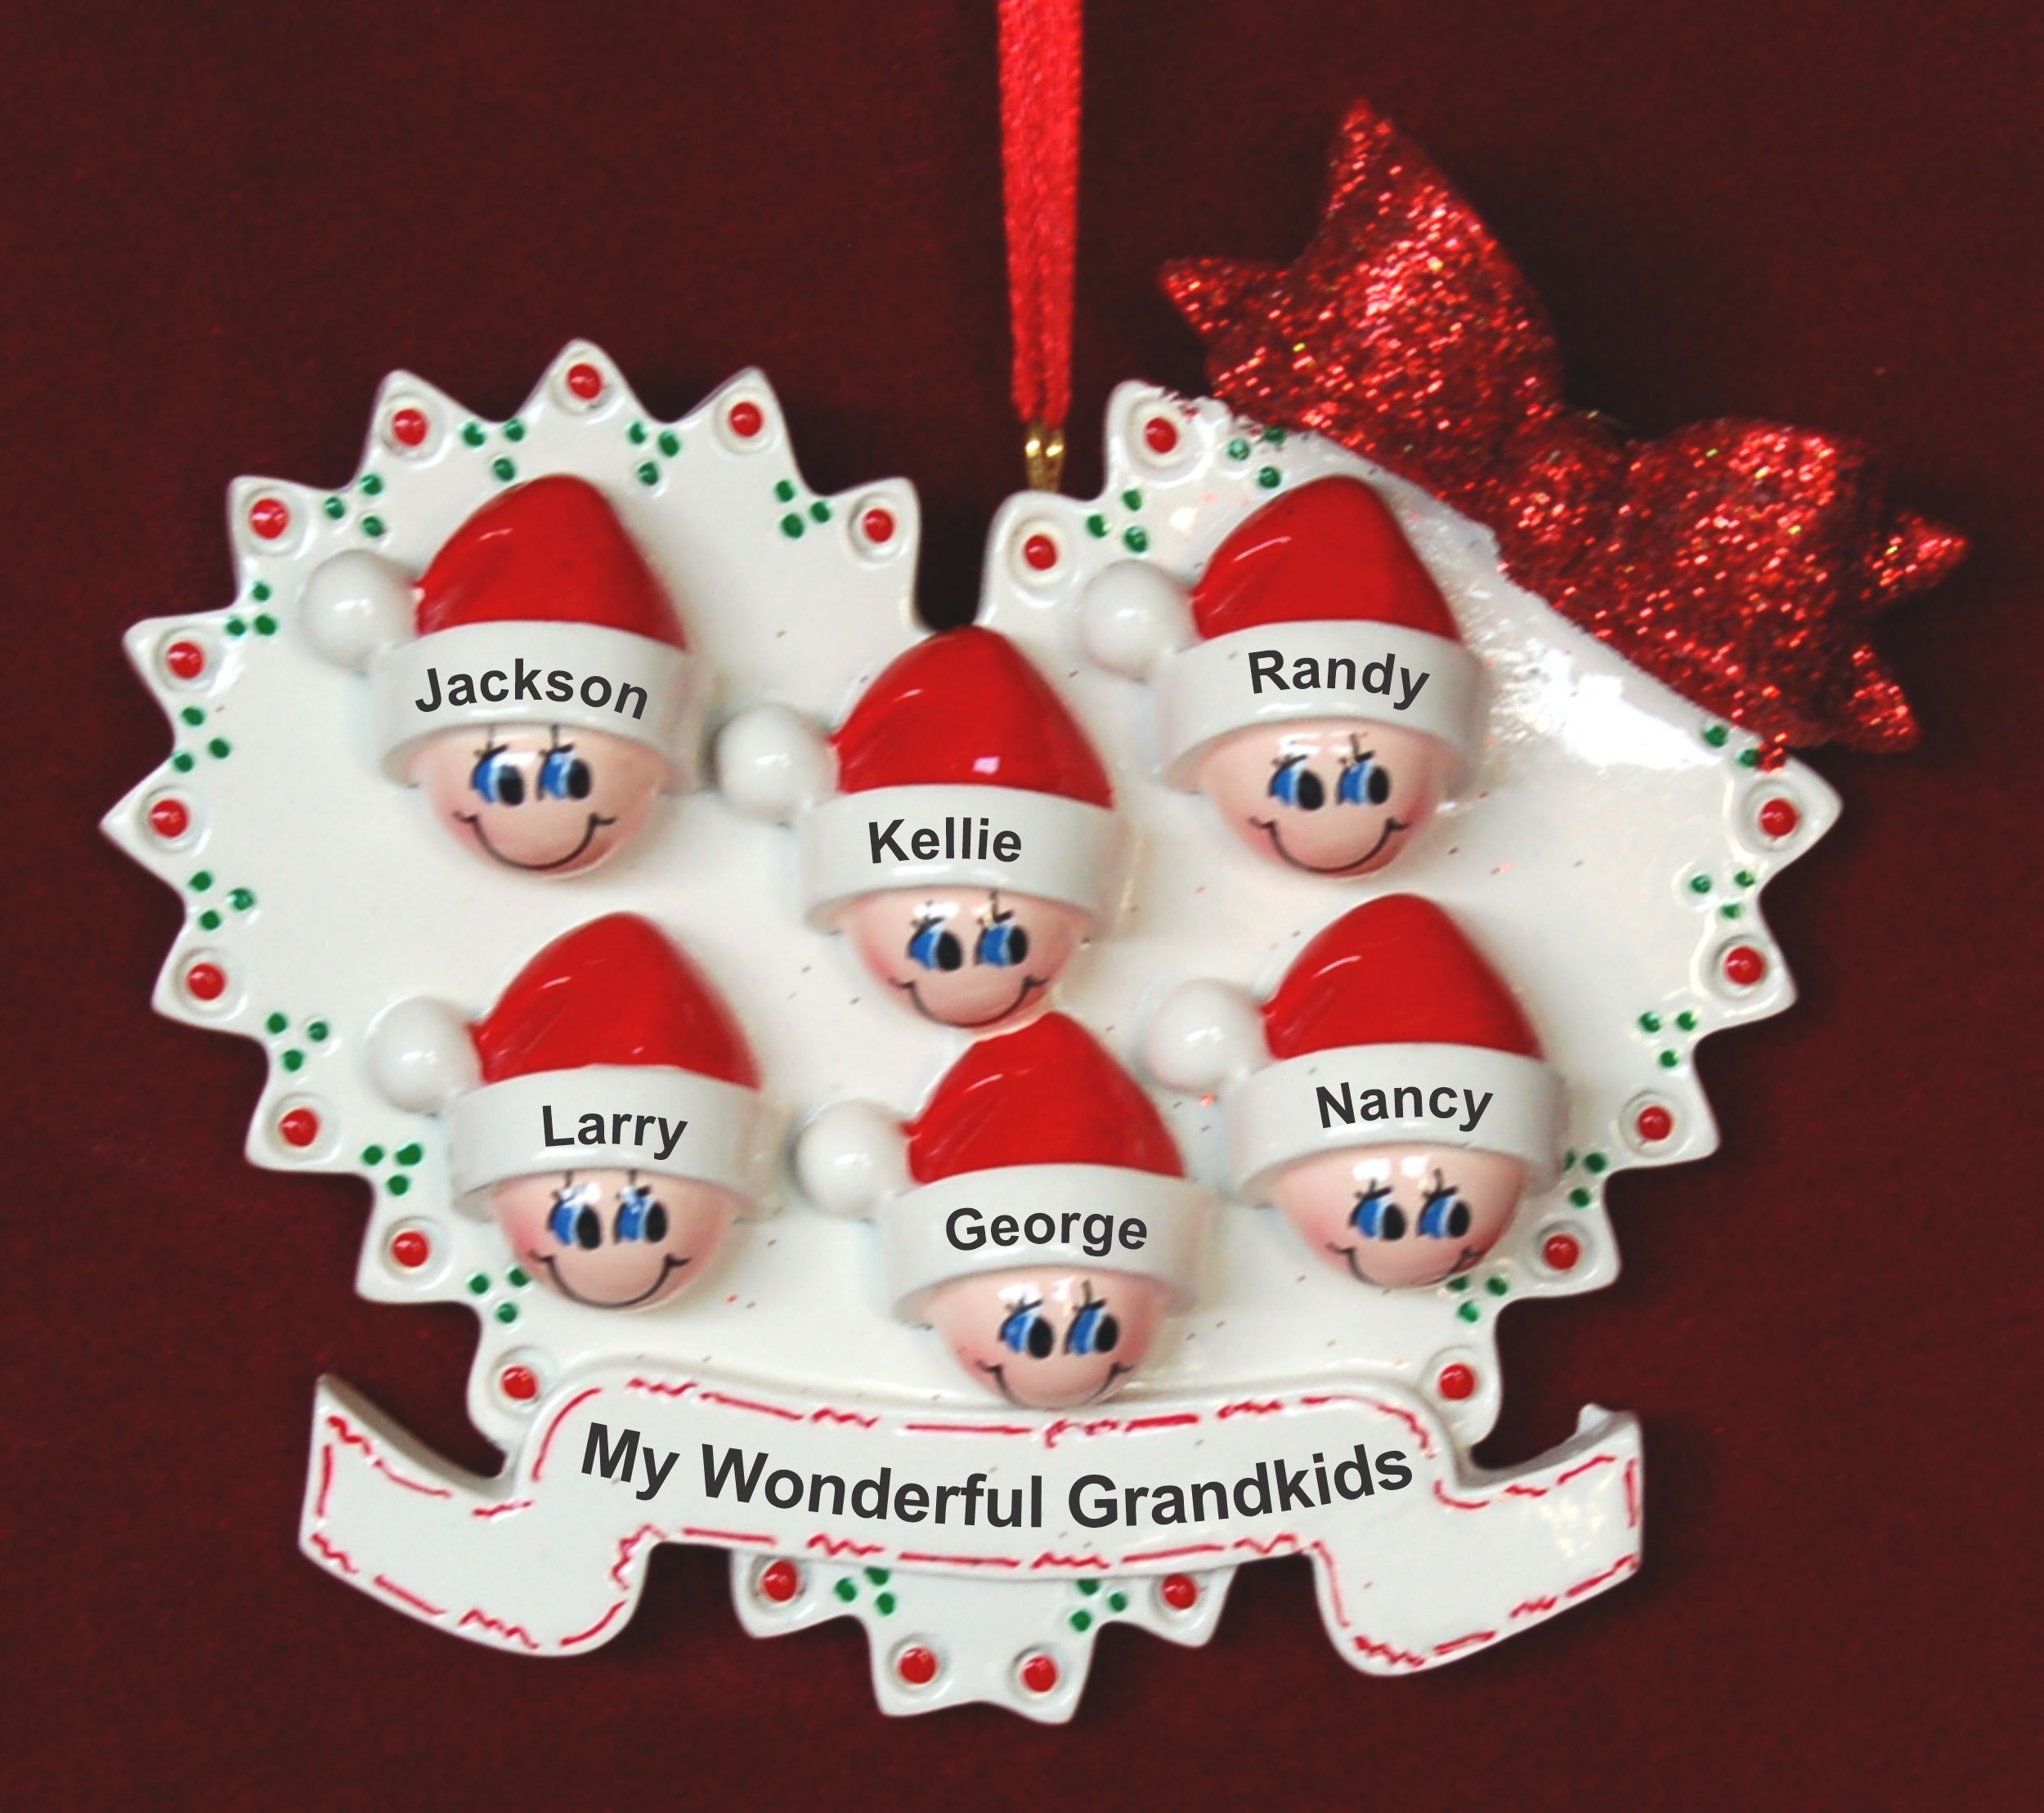 Personalized Grandparents Christmas Ornament Quilt of Love 6 Grandkids by Russell Rhodes